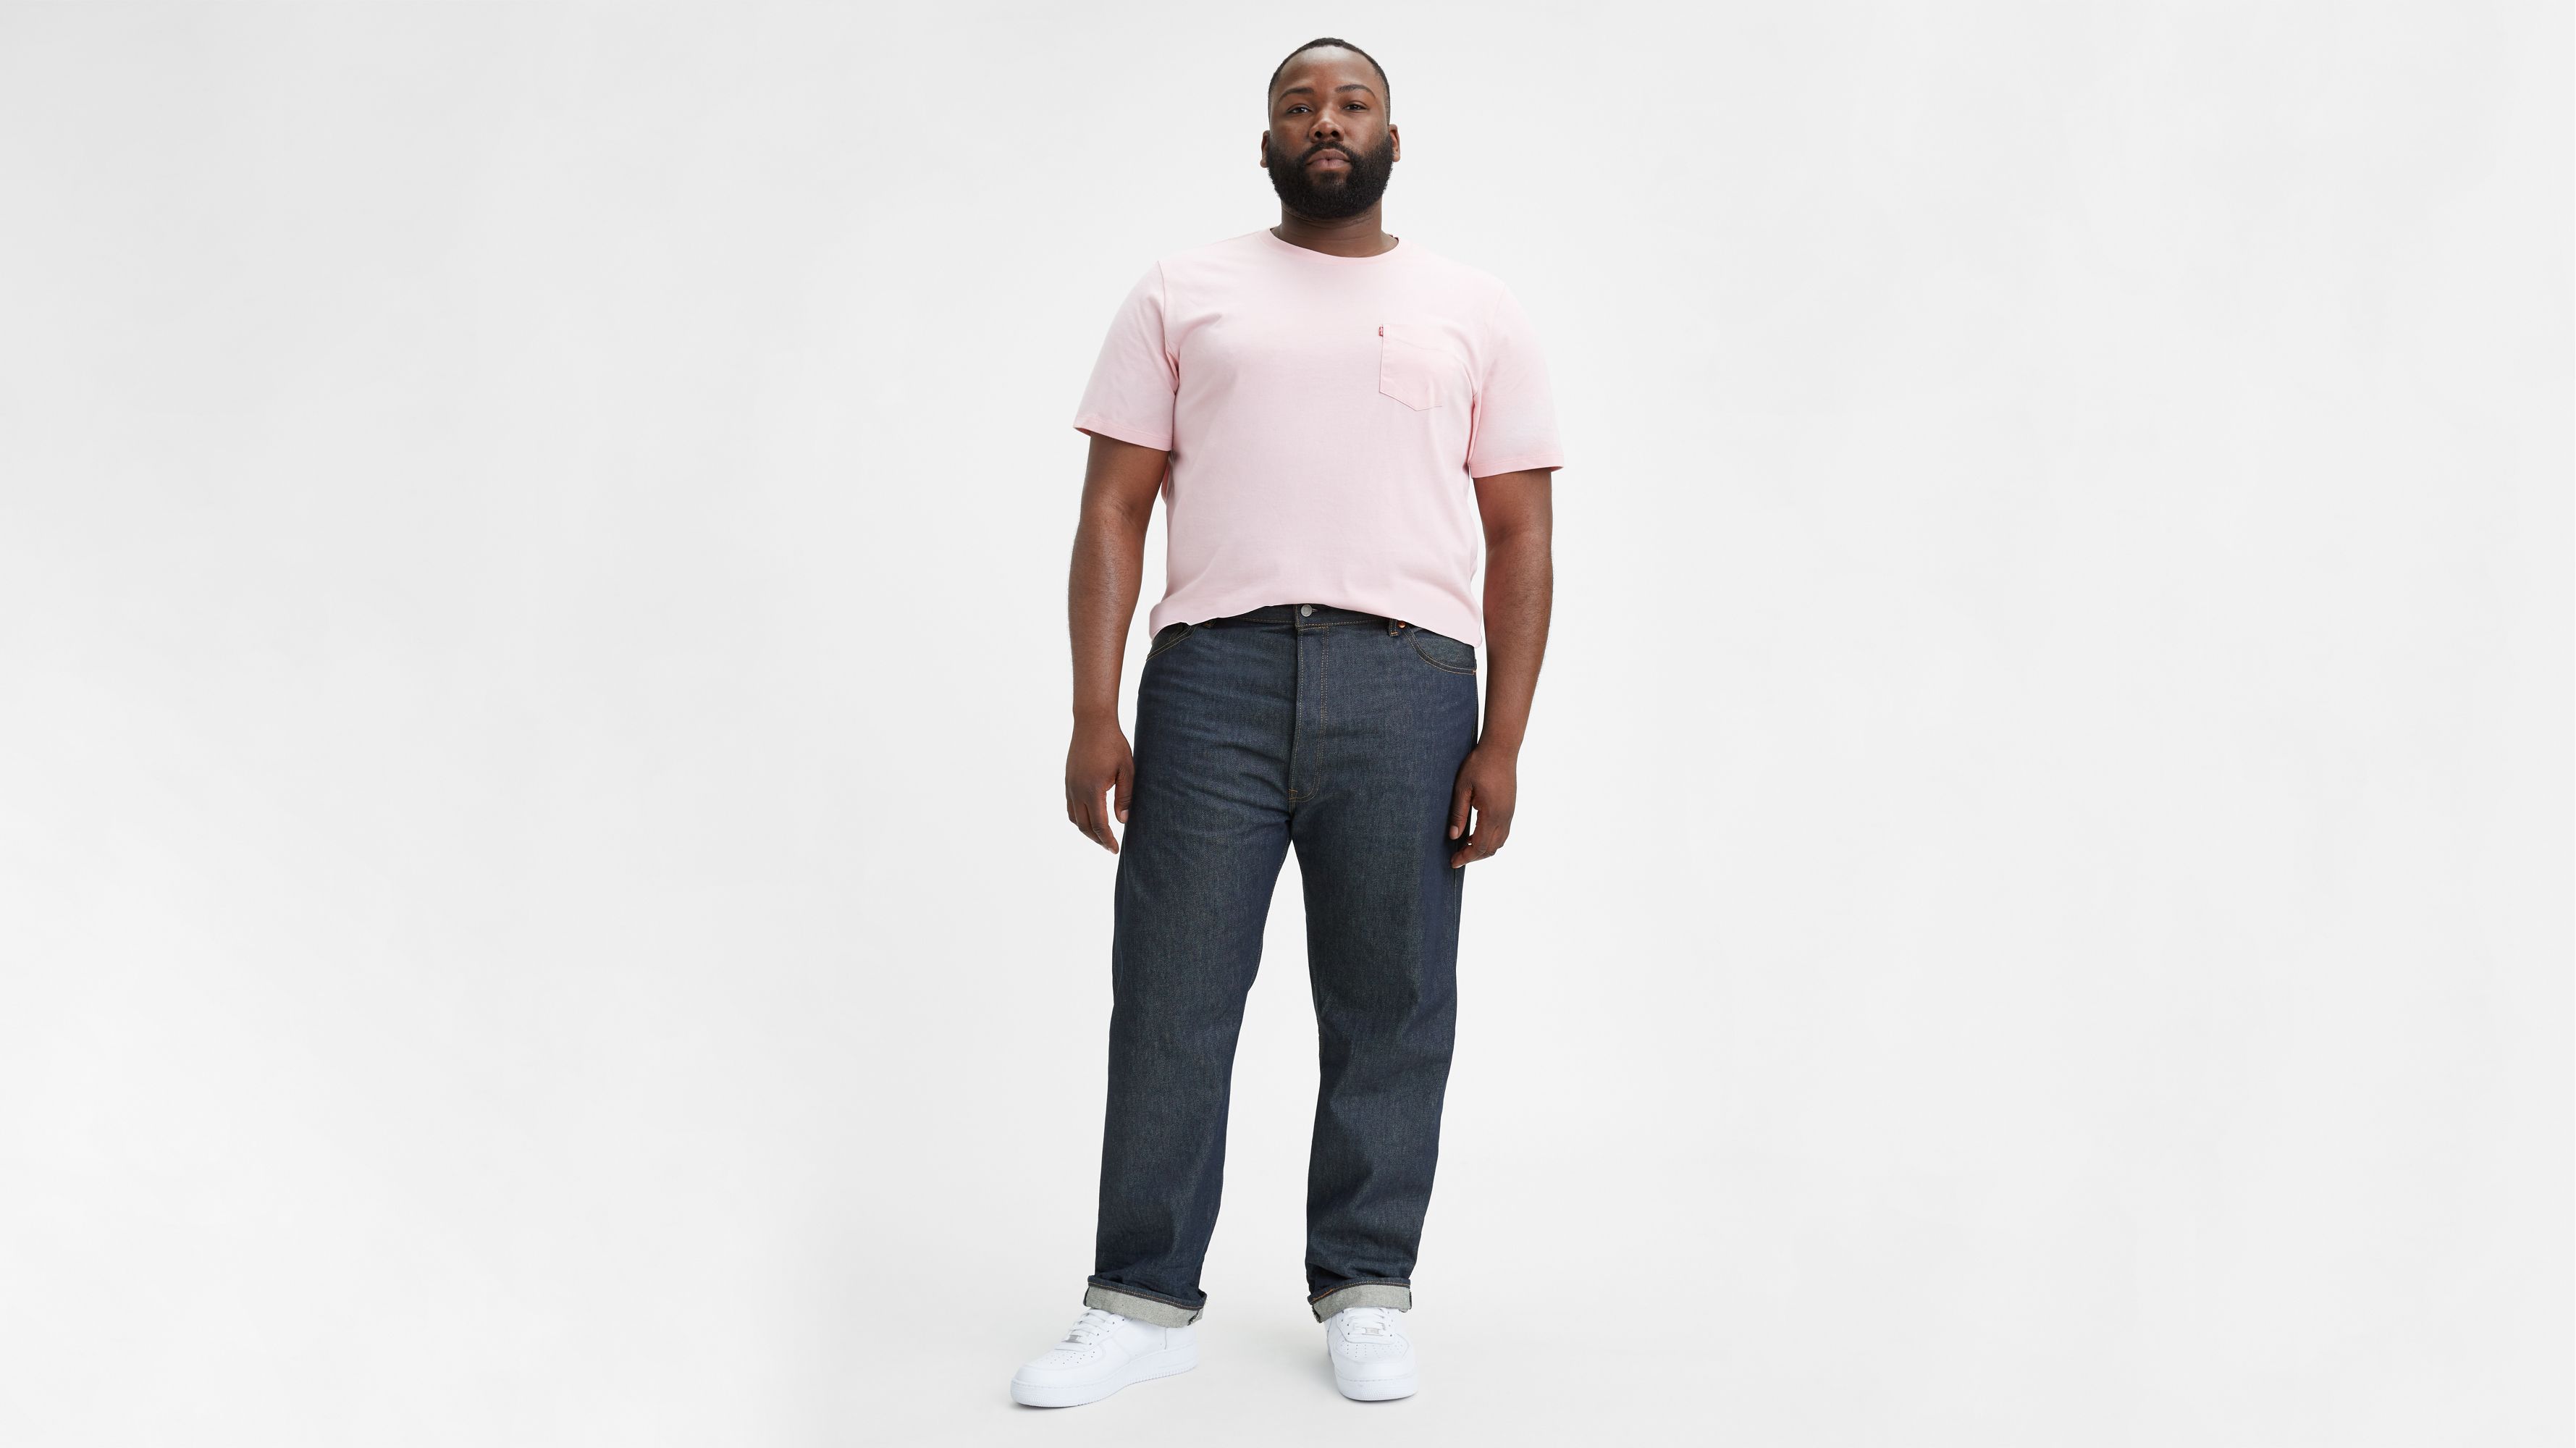 levis 501 shrink to fit sizing